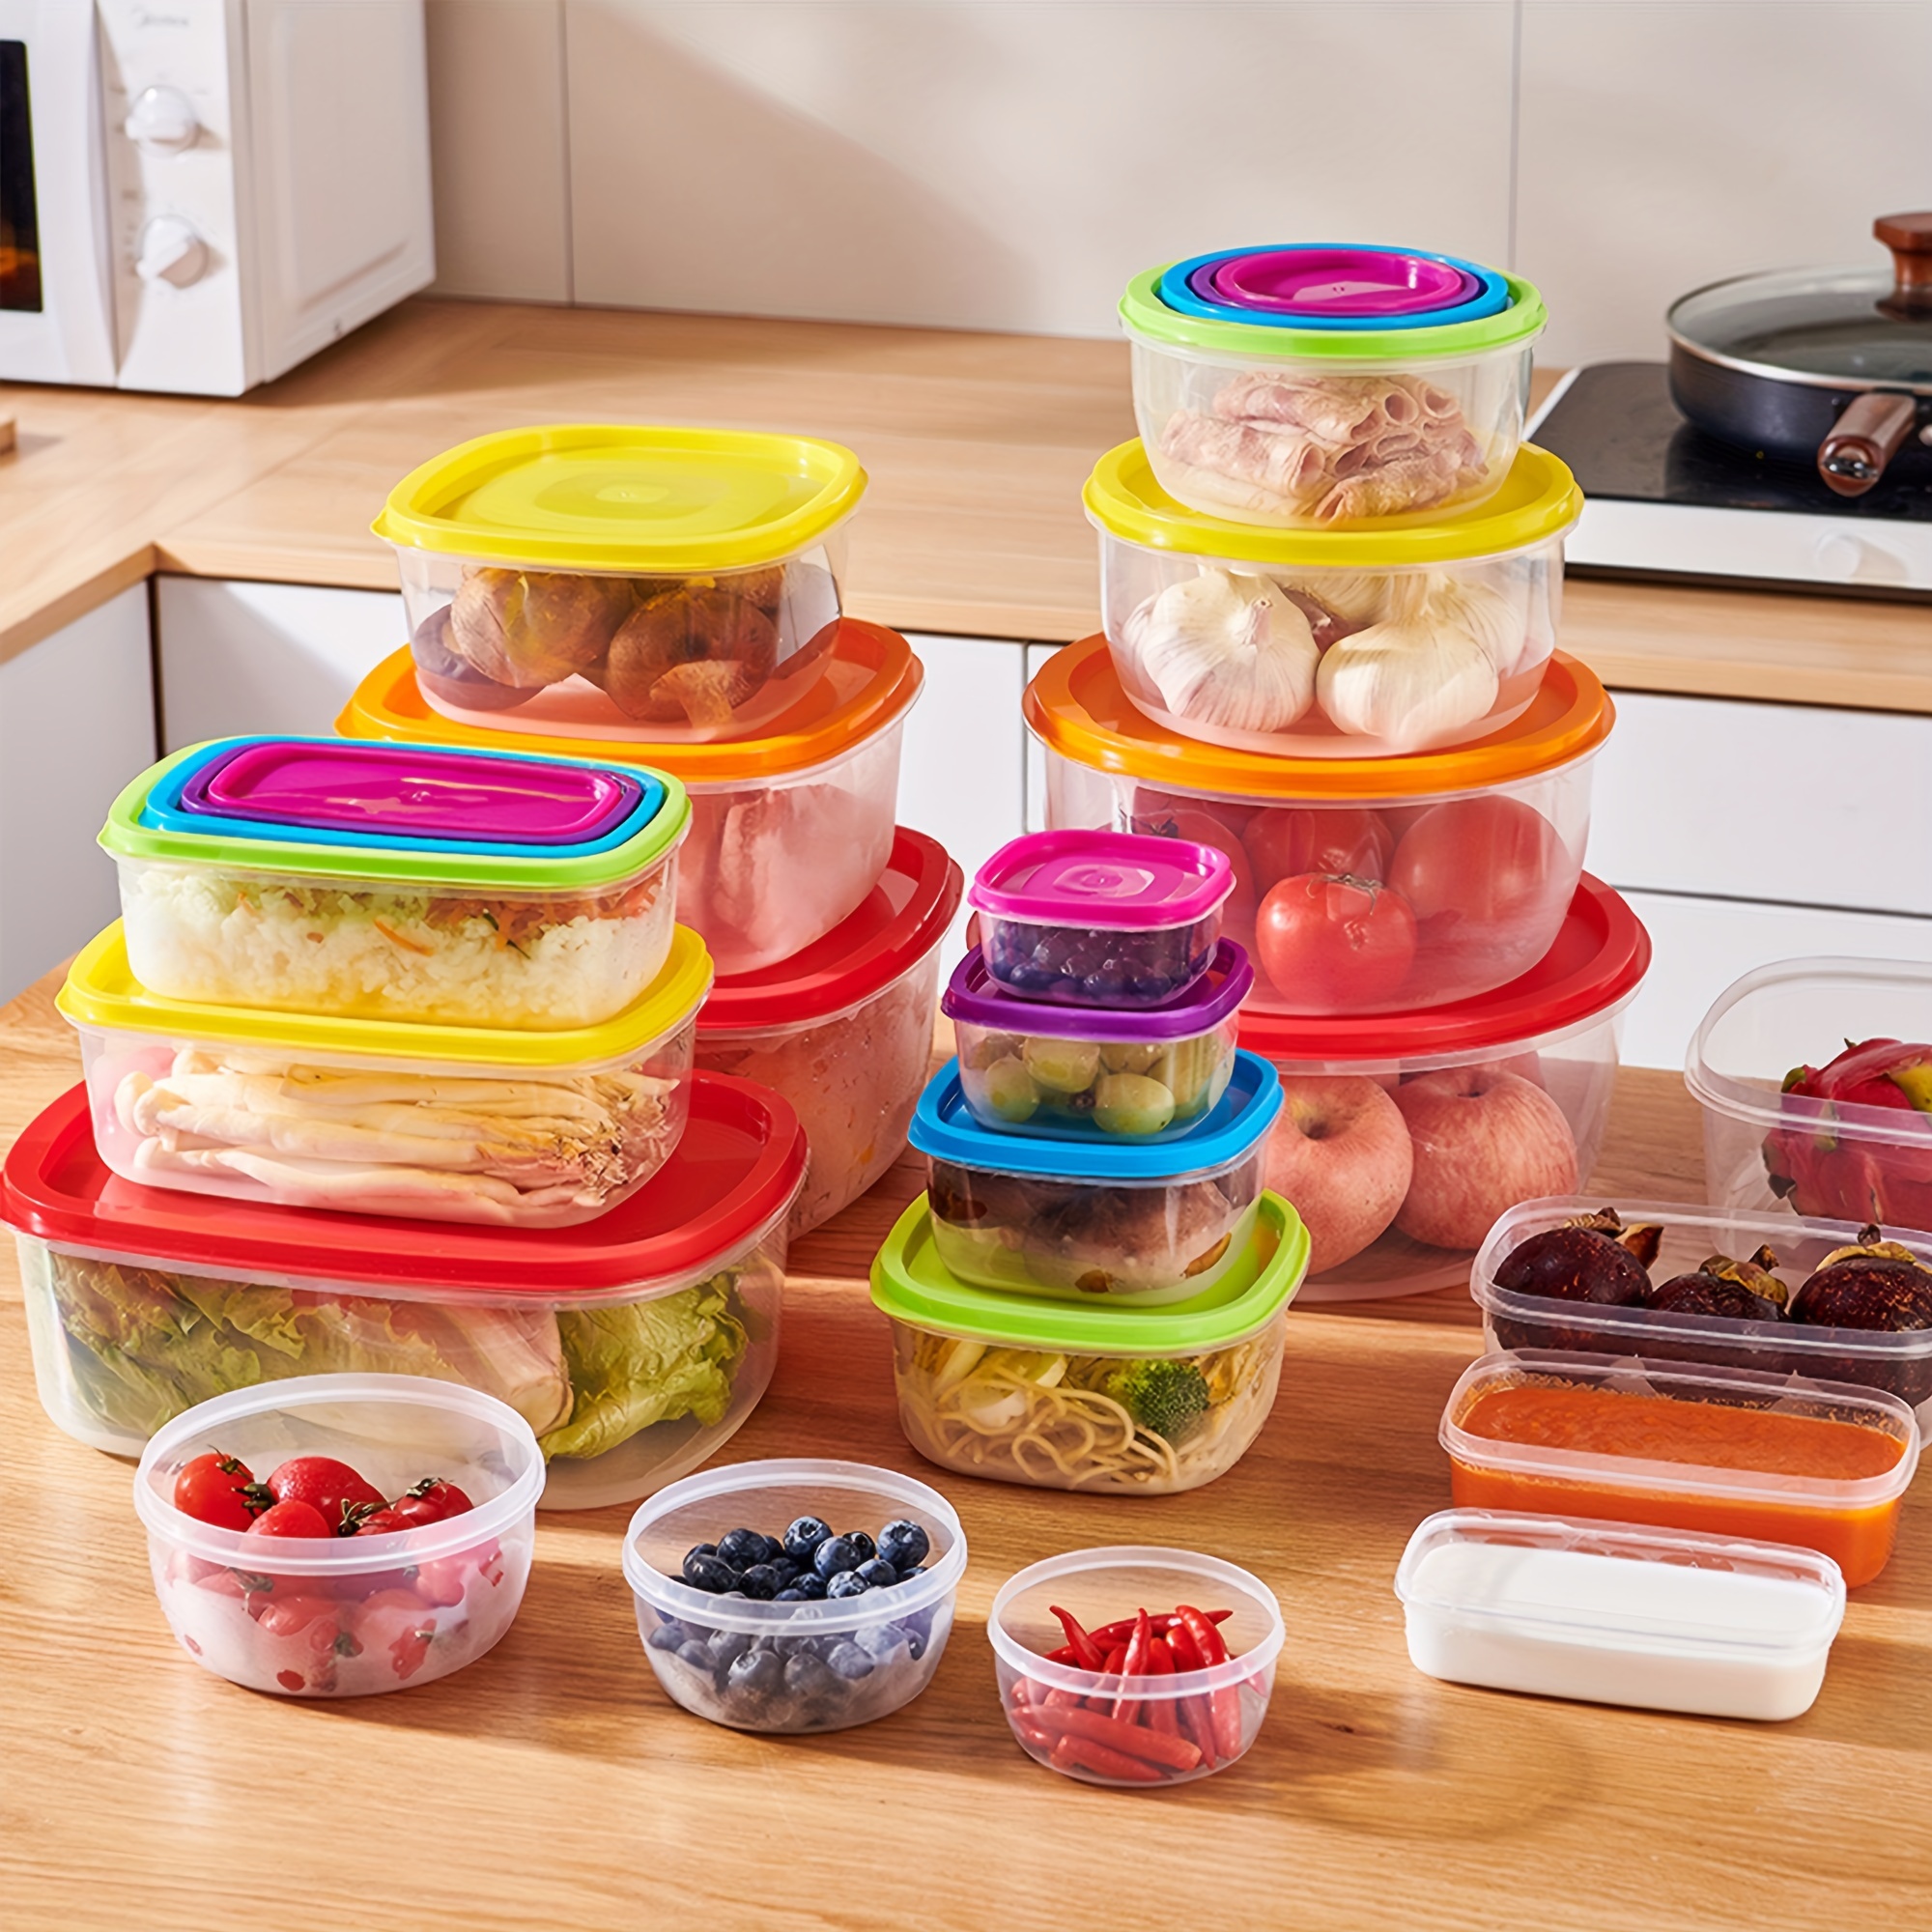 Rainbow Colored 7pcs Food Storage Containers Set With Lids, Large Capacity,  Reusable, Leak-proof, Suitable For Meal Prep, Microwave, Freezer And  Dishwasher Safe